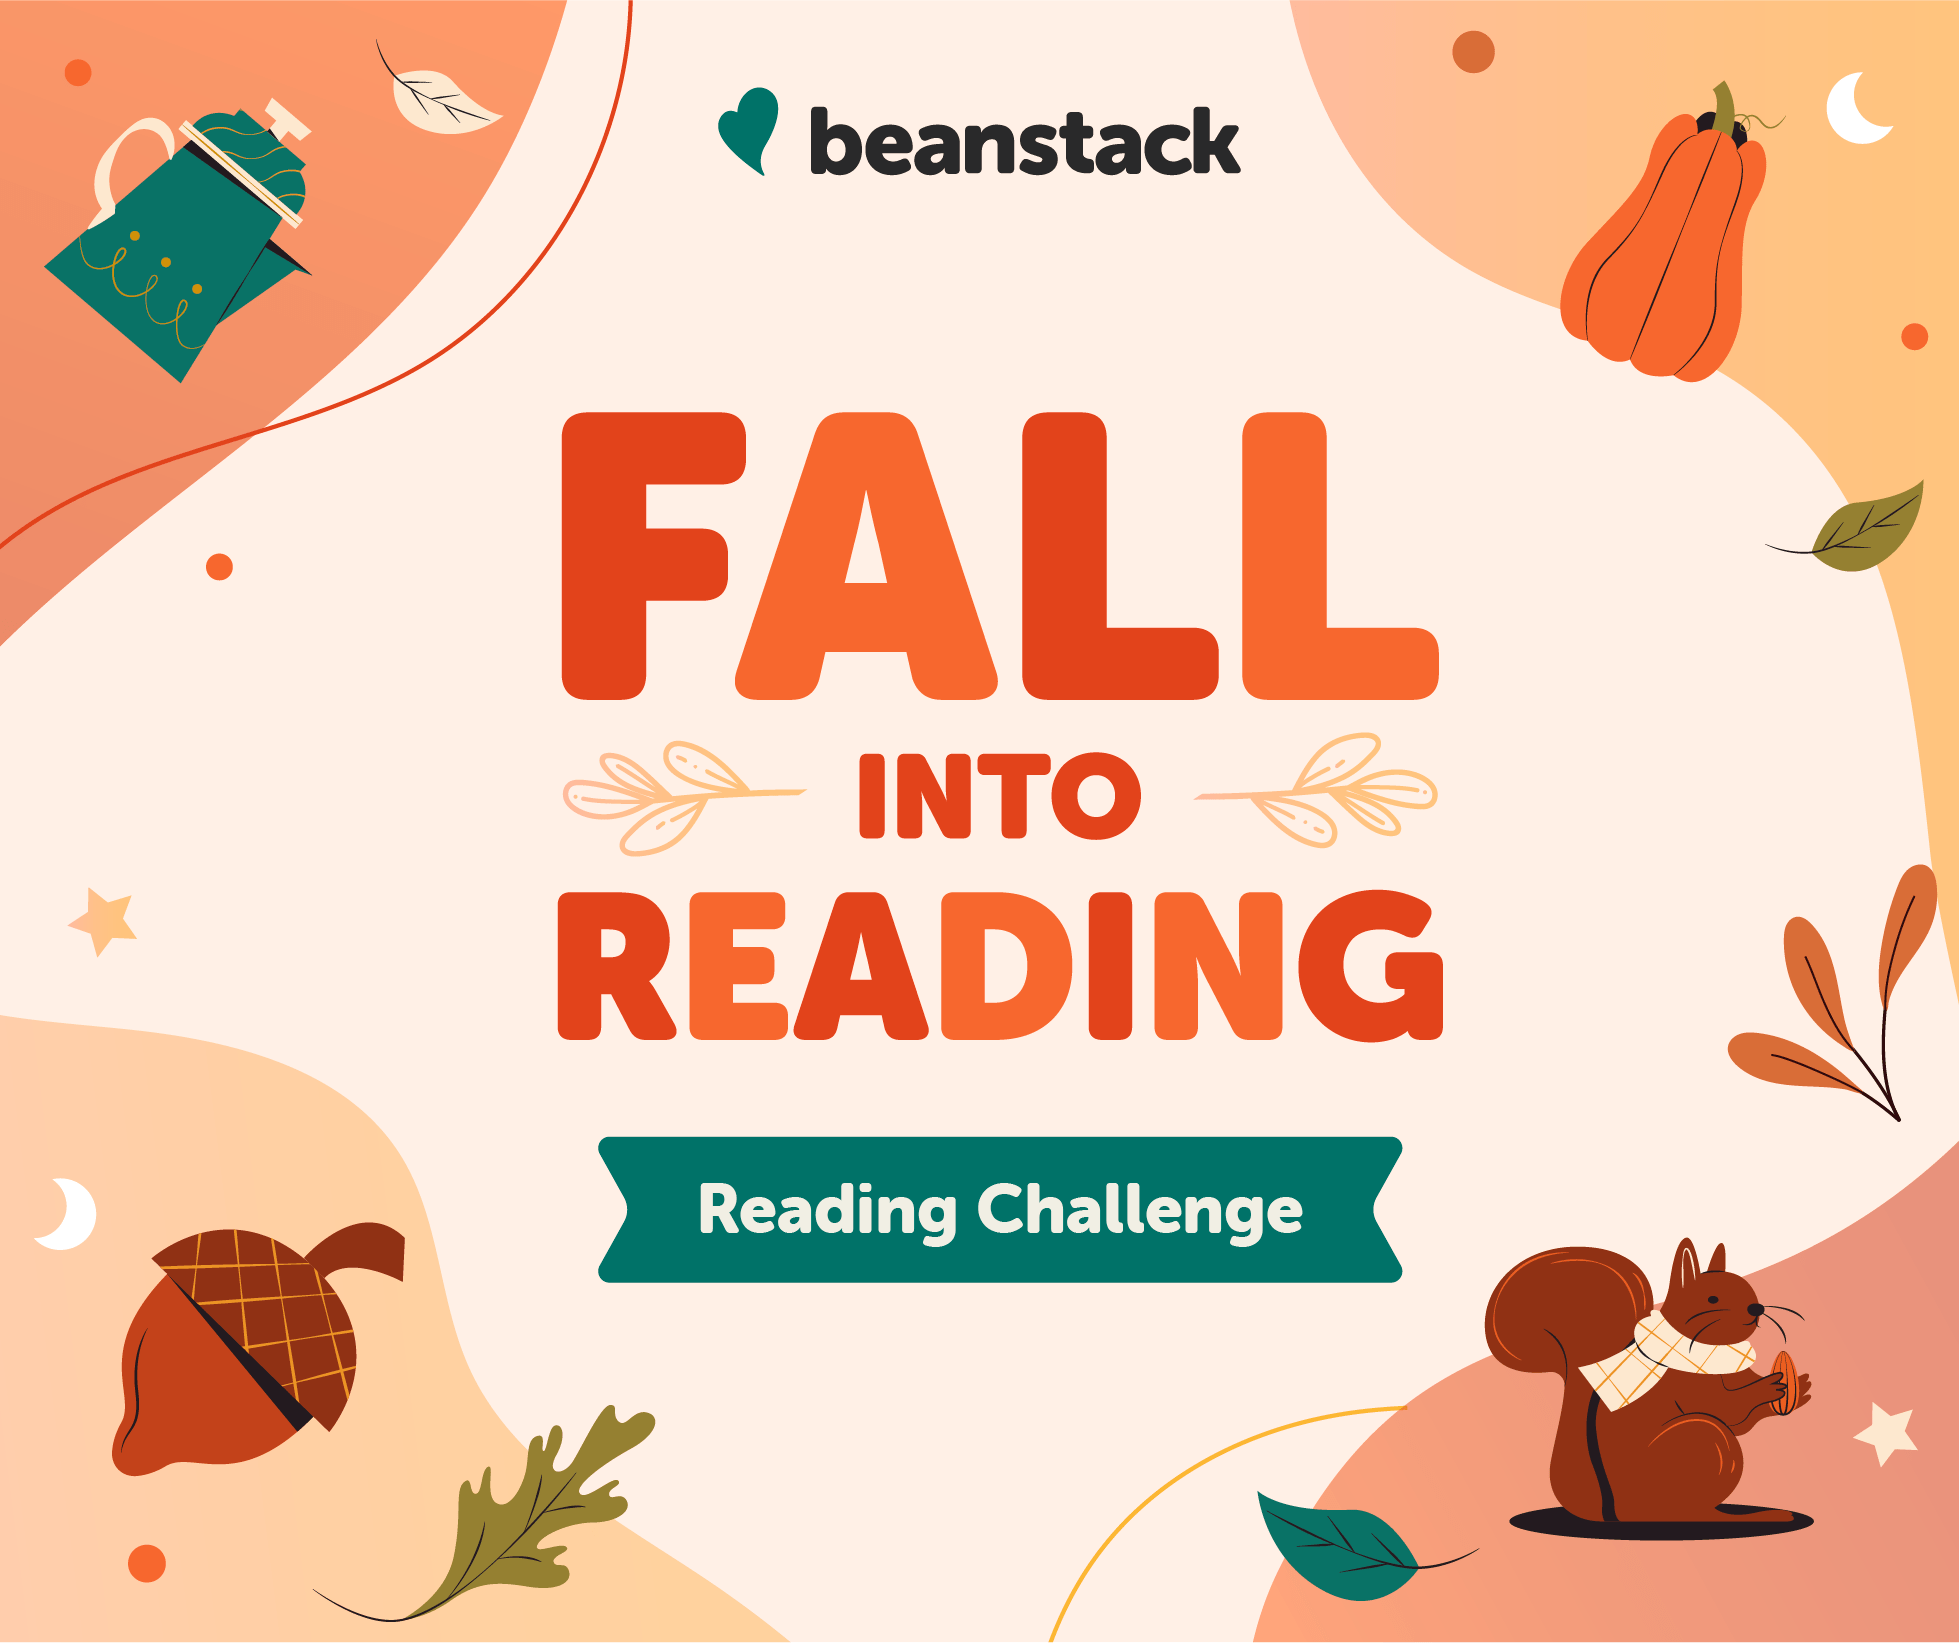 Fall into reading challenge. Orange background with pumpkins, acorns and a squirrel.